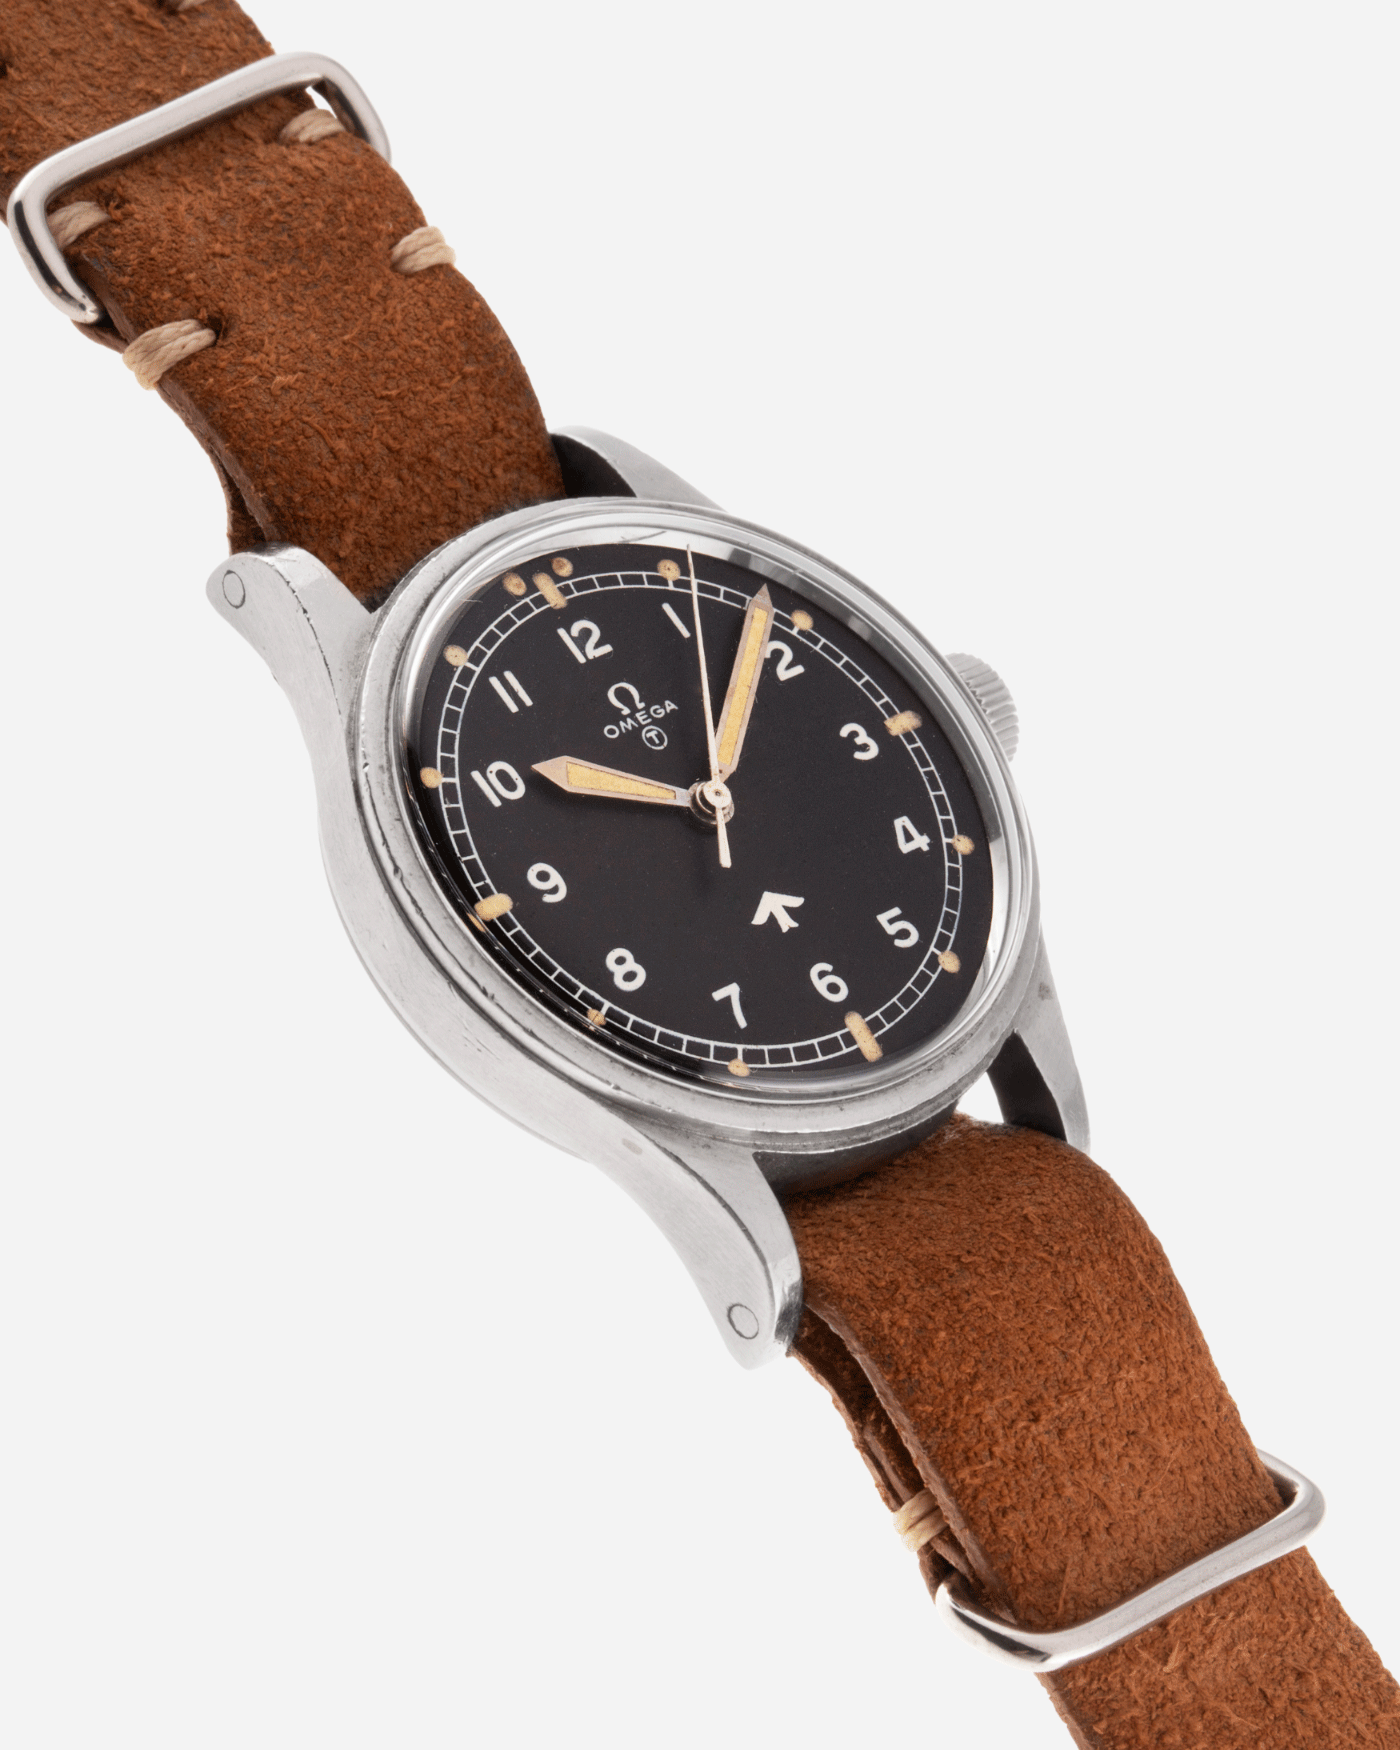 Brand: Omega Year: 1953 Model: Fat Arrow 53 Reference Number: CK 2777-1 Material: Stainless Steel Movement: ‘Specially Adjusted’ Cal. 283 Case Diameter: 37mm Lug Width: 18mm Bracelet/Strap: JPM X S.Song Sand Brown Distressed Leather NATO